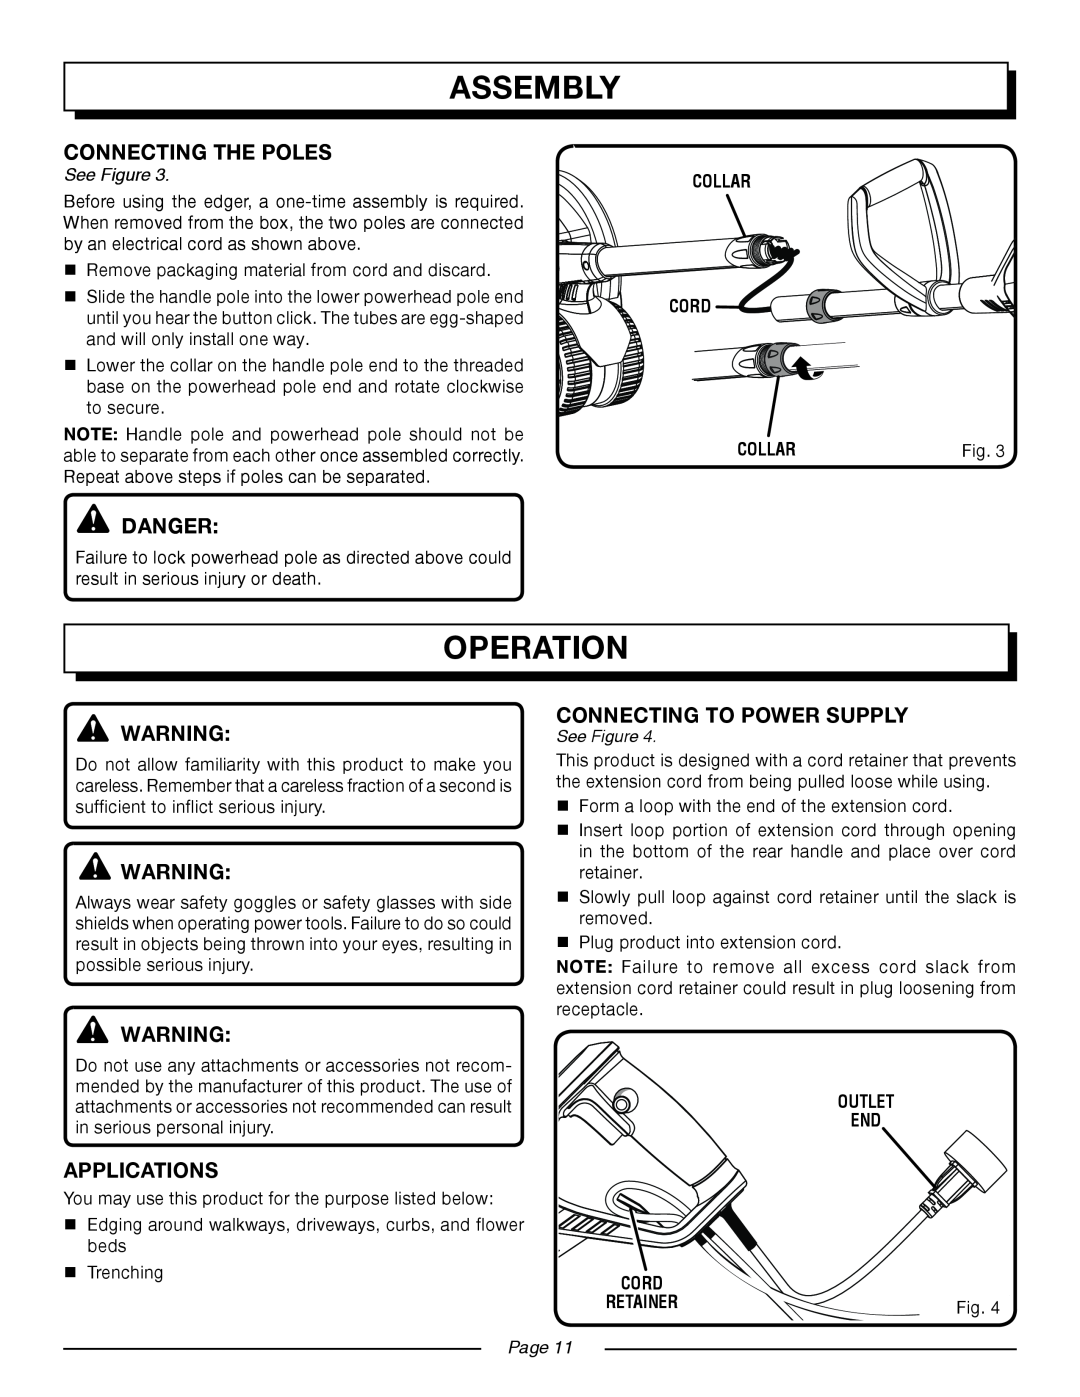 Homelite UT45100 manual Operation, Assembly, Connecting To Power Supply, See Figure, collar CORD, Page, Outlet End 